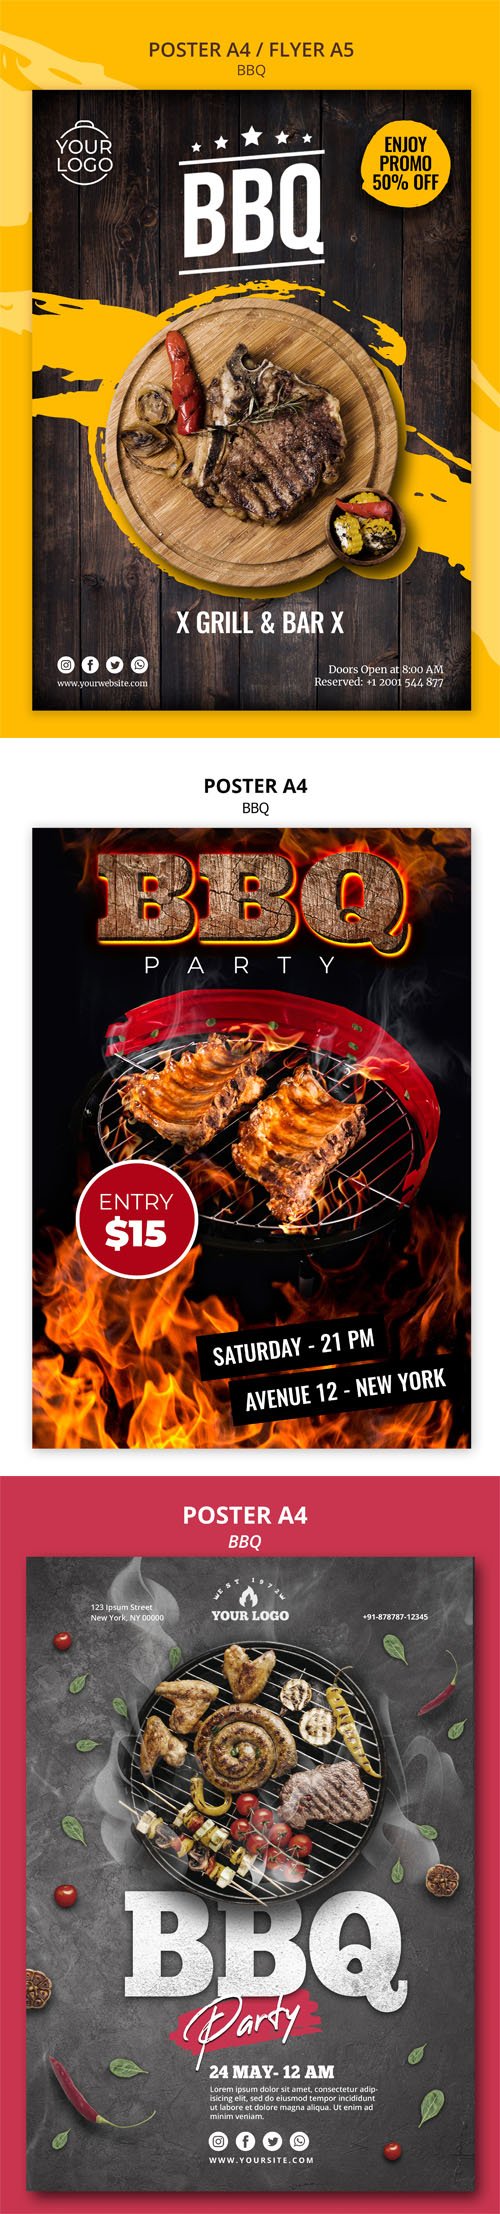 Barbeque BBQ Poster A4 / Flyer A5 PSD Templates